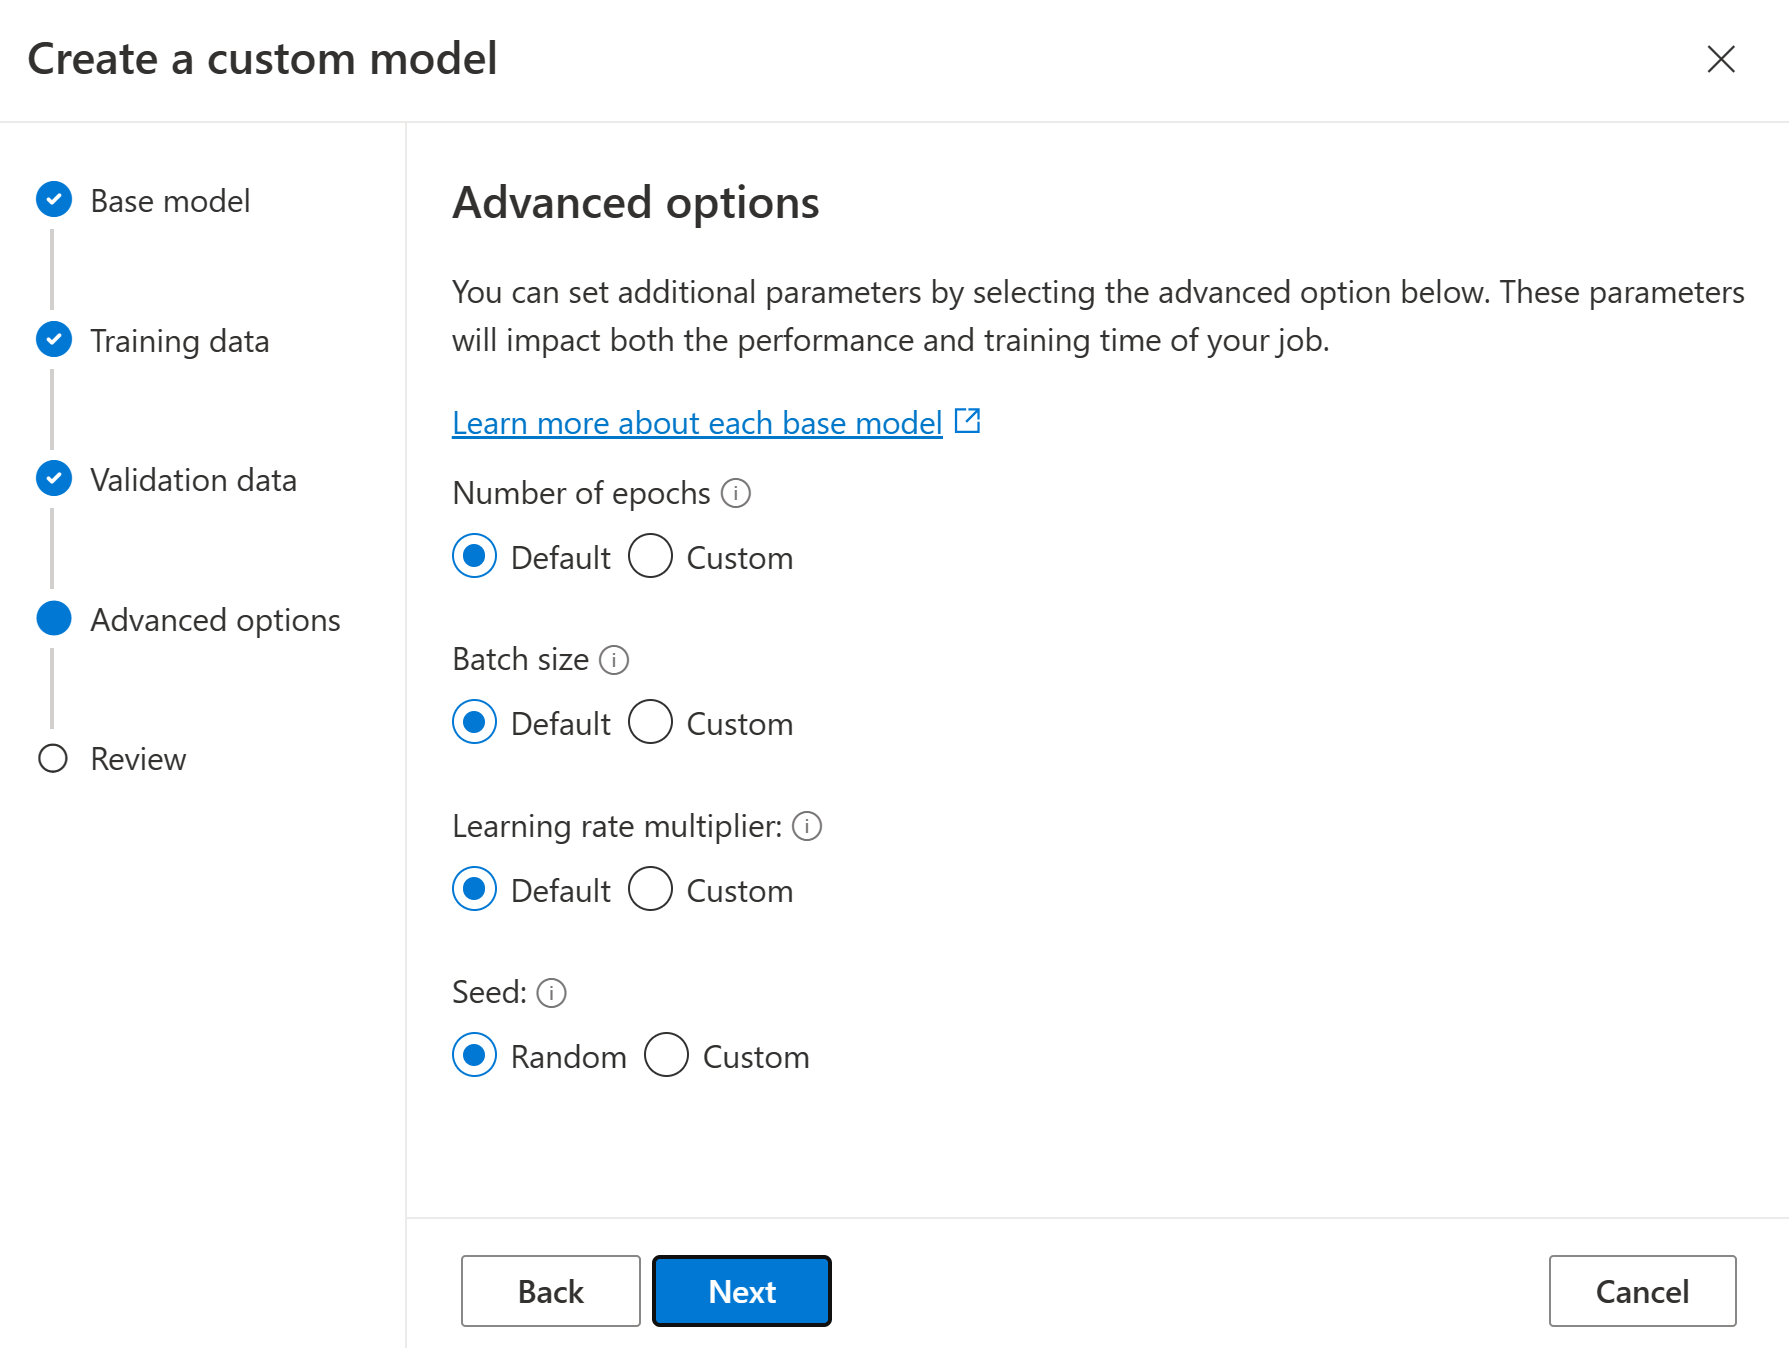 Screenshot of the Advanced options pane for the Create custom model wizard, with default options selected.